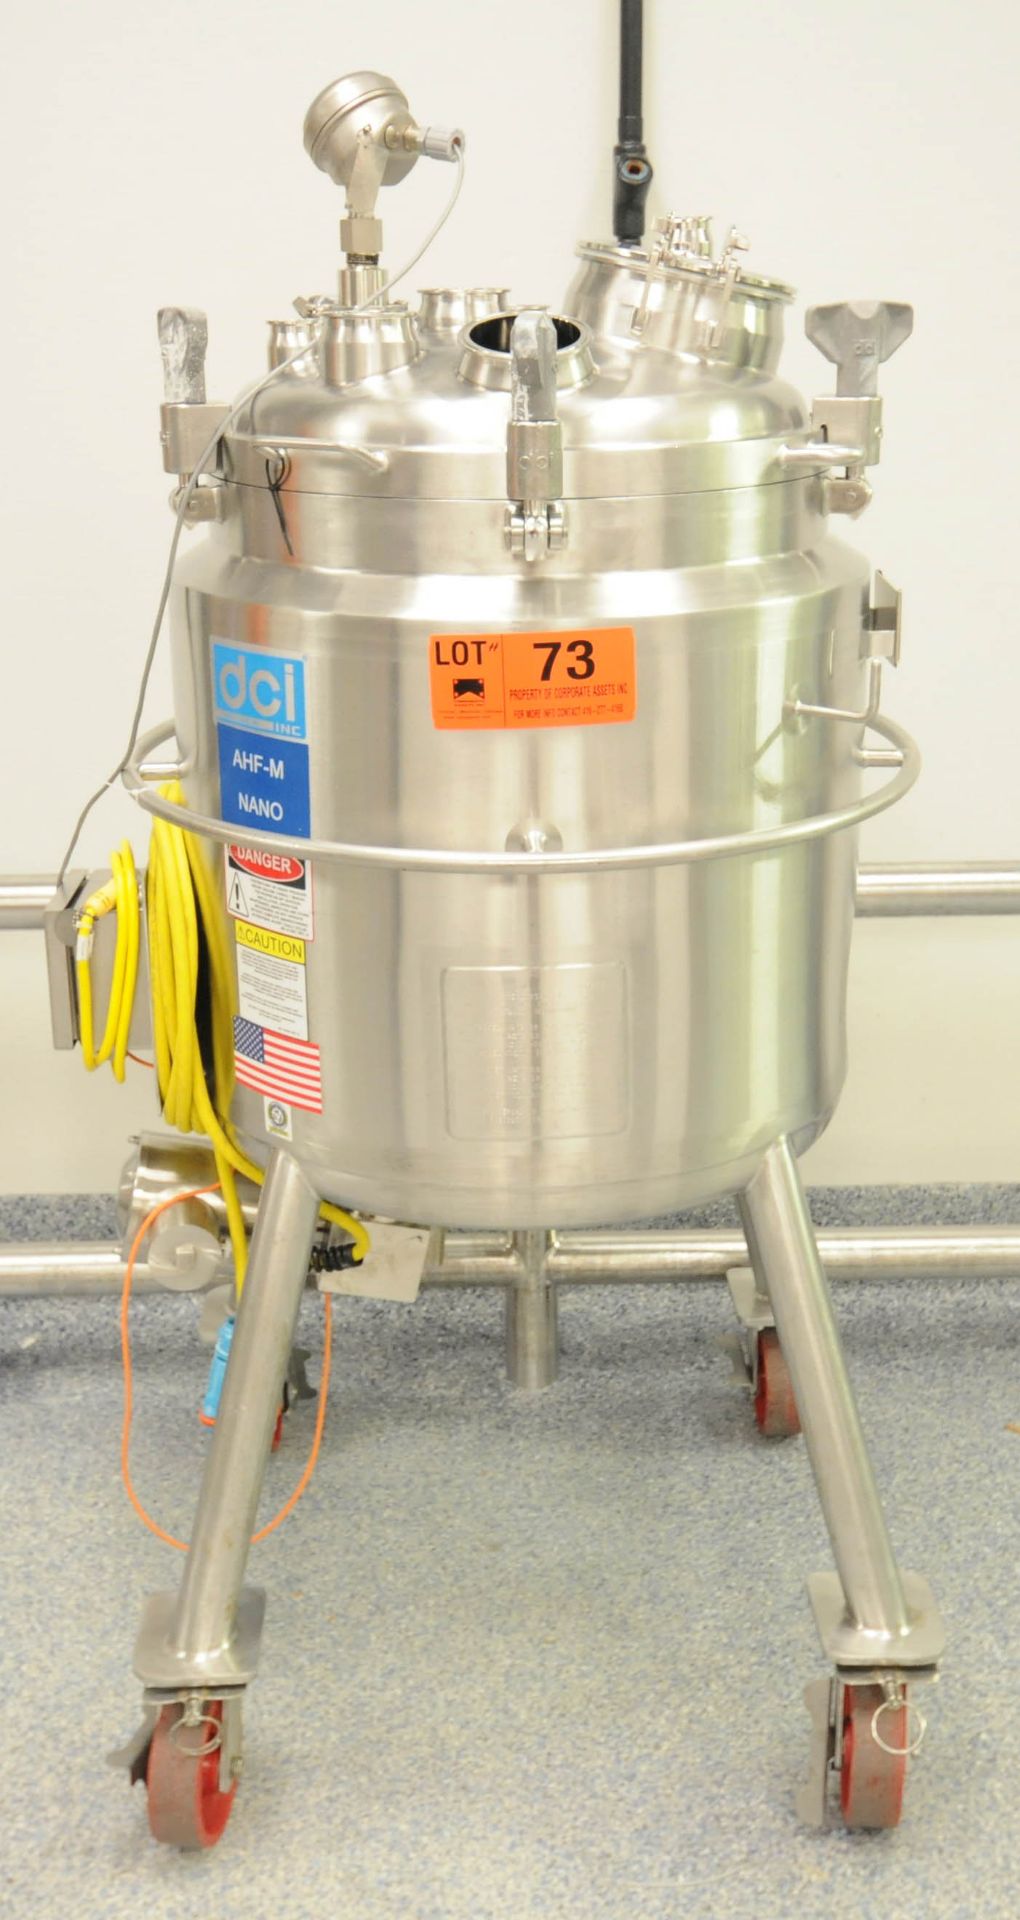 DCI (2009) AHF-M NANO PORTABLE JACKETED STAINLESS STEEL REACTOR VESSEL WITH 150 LITER CAPACITY, 45